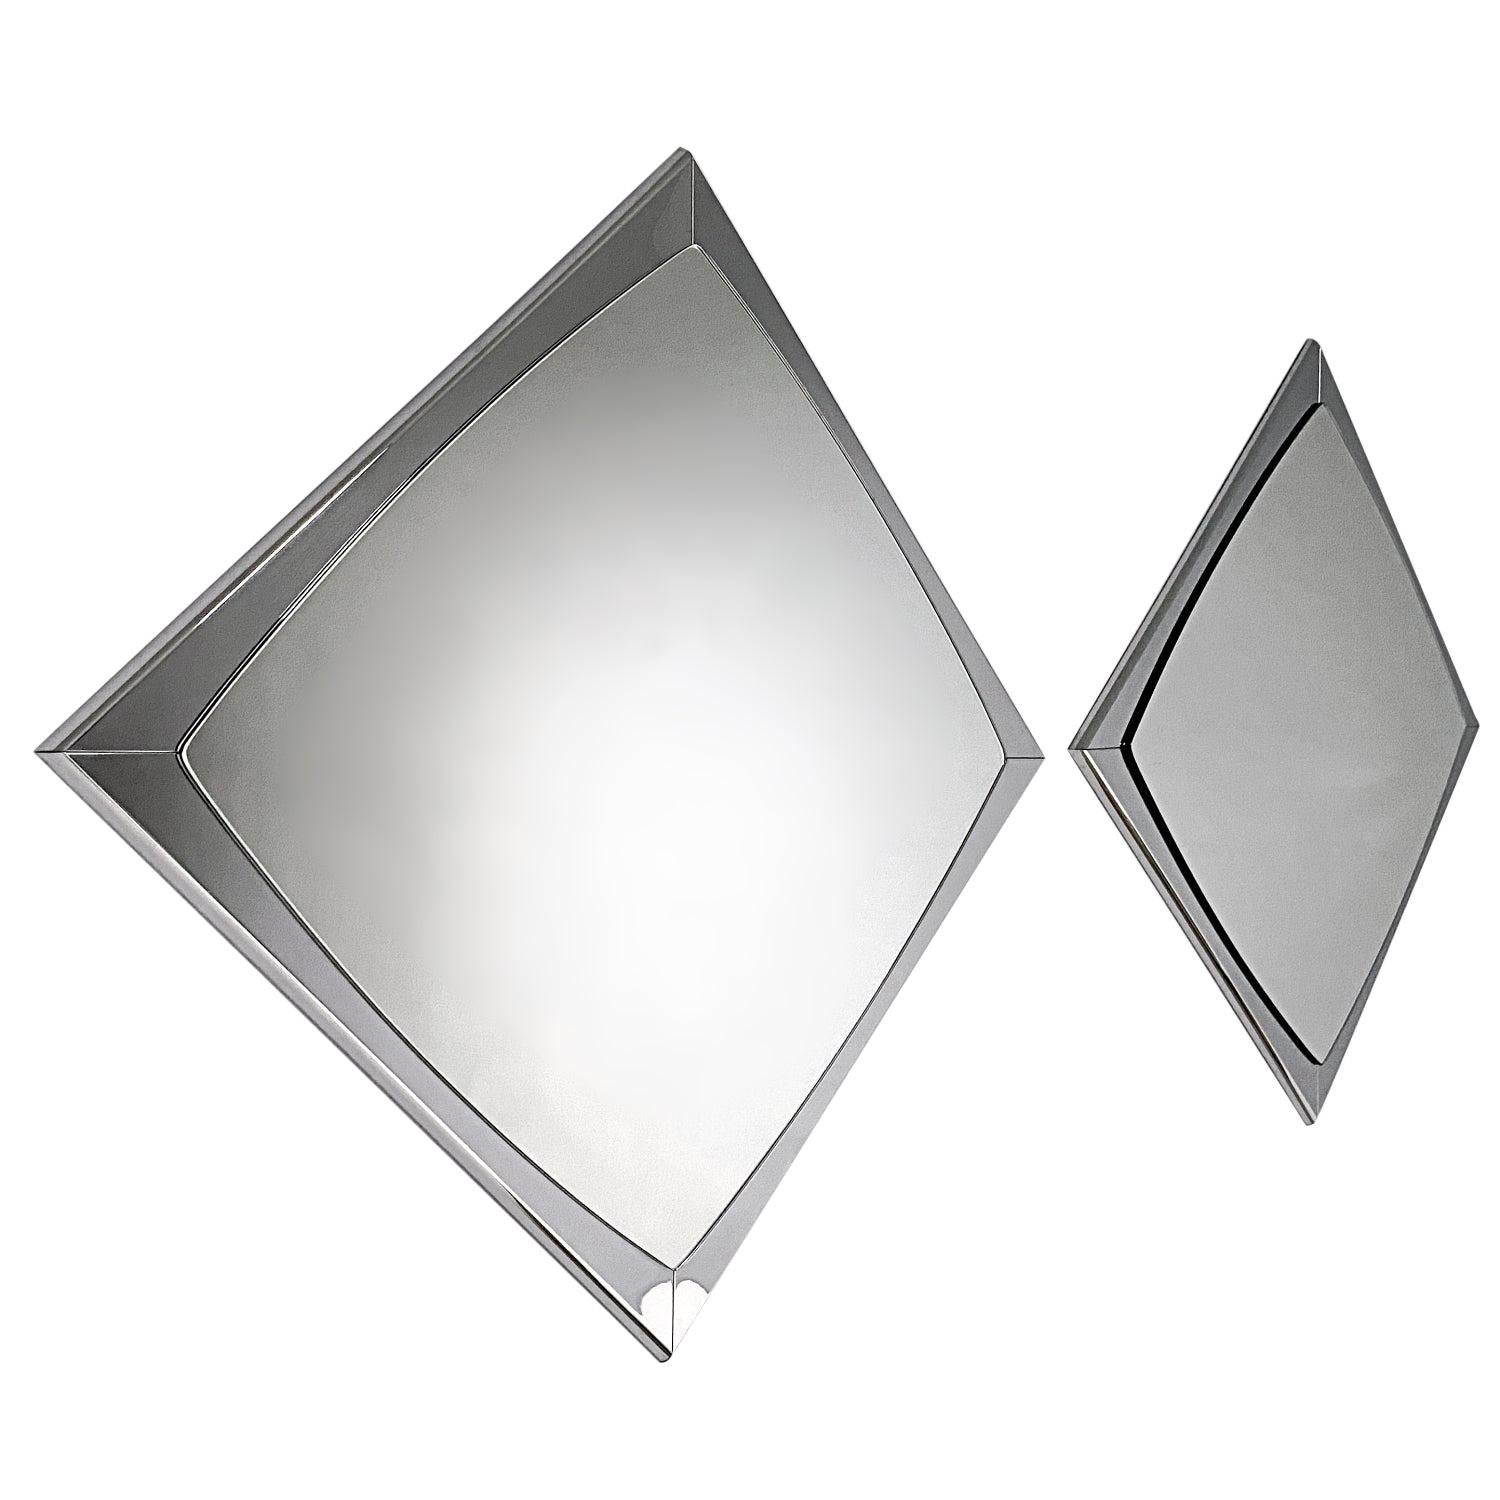 Pair of Italian Designer Midcentury Stainless Steel Wall Mirrors, 1960s, Italy For Sale